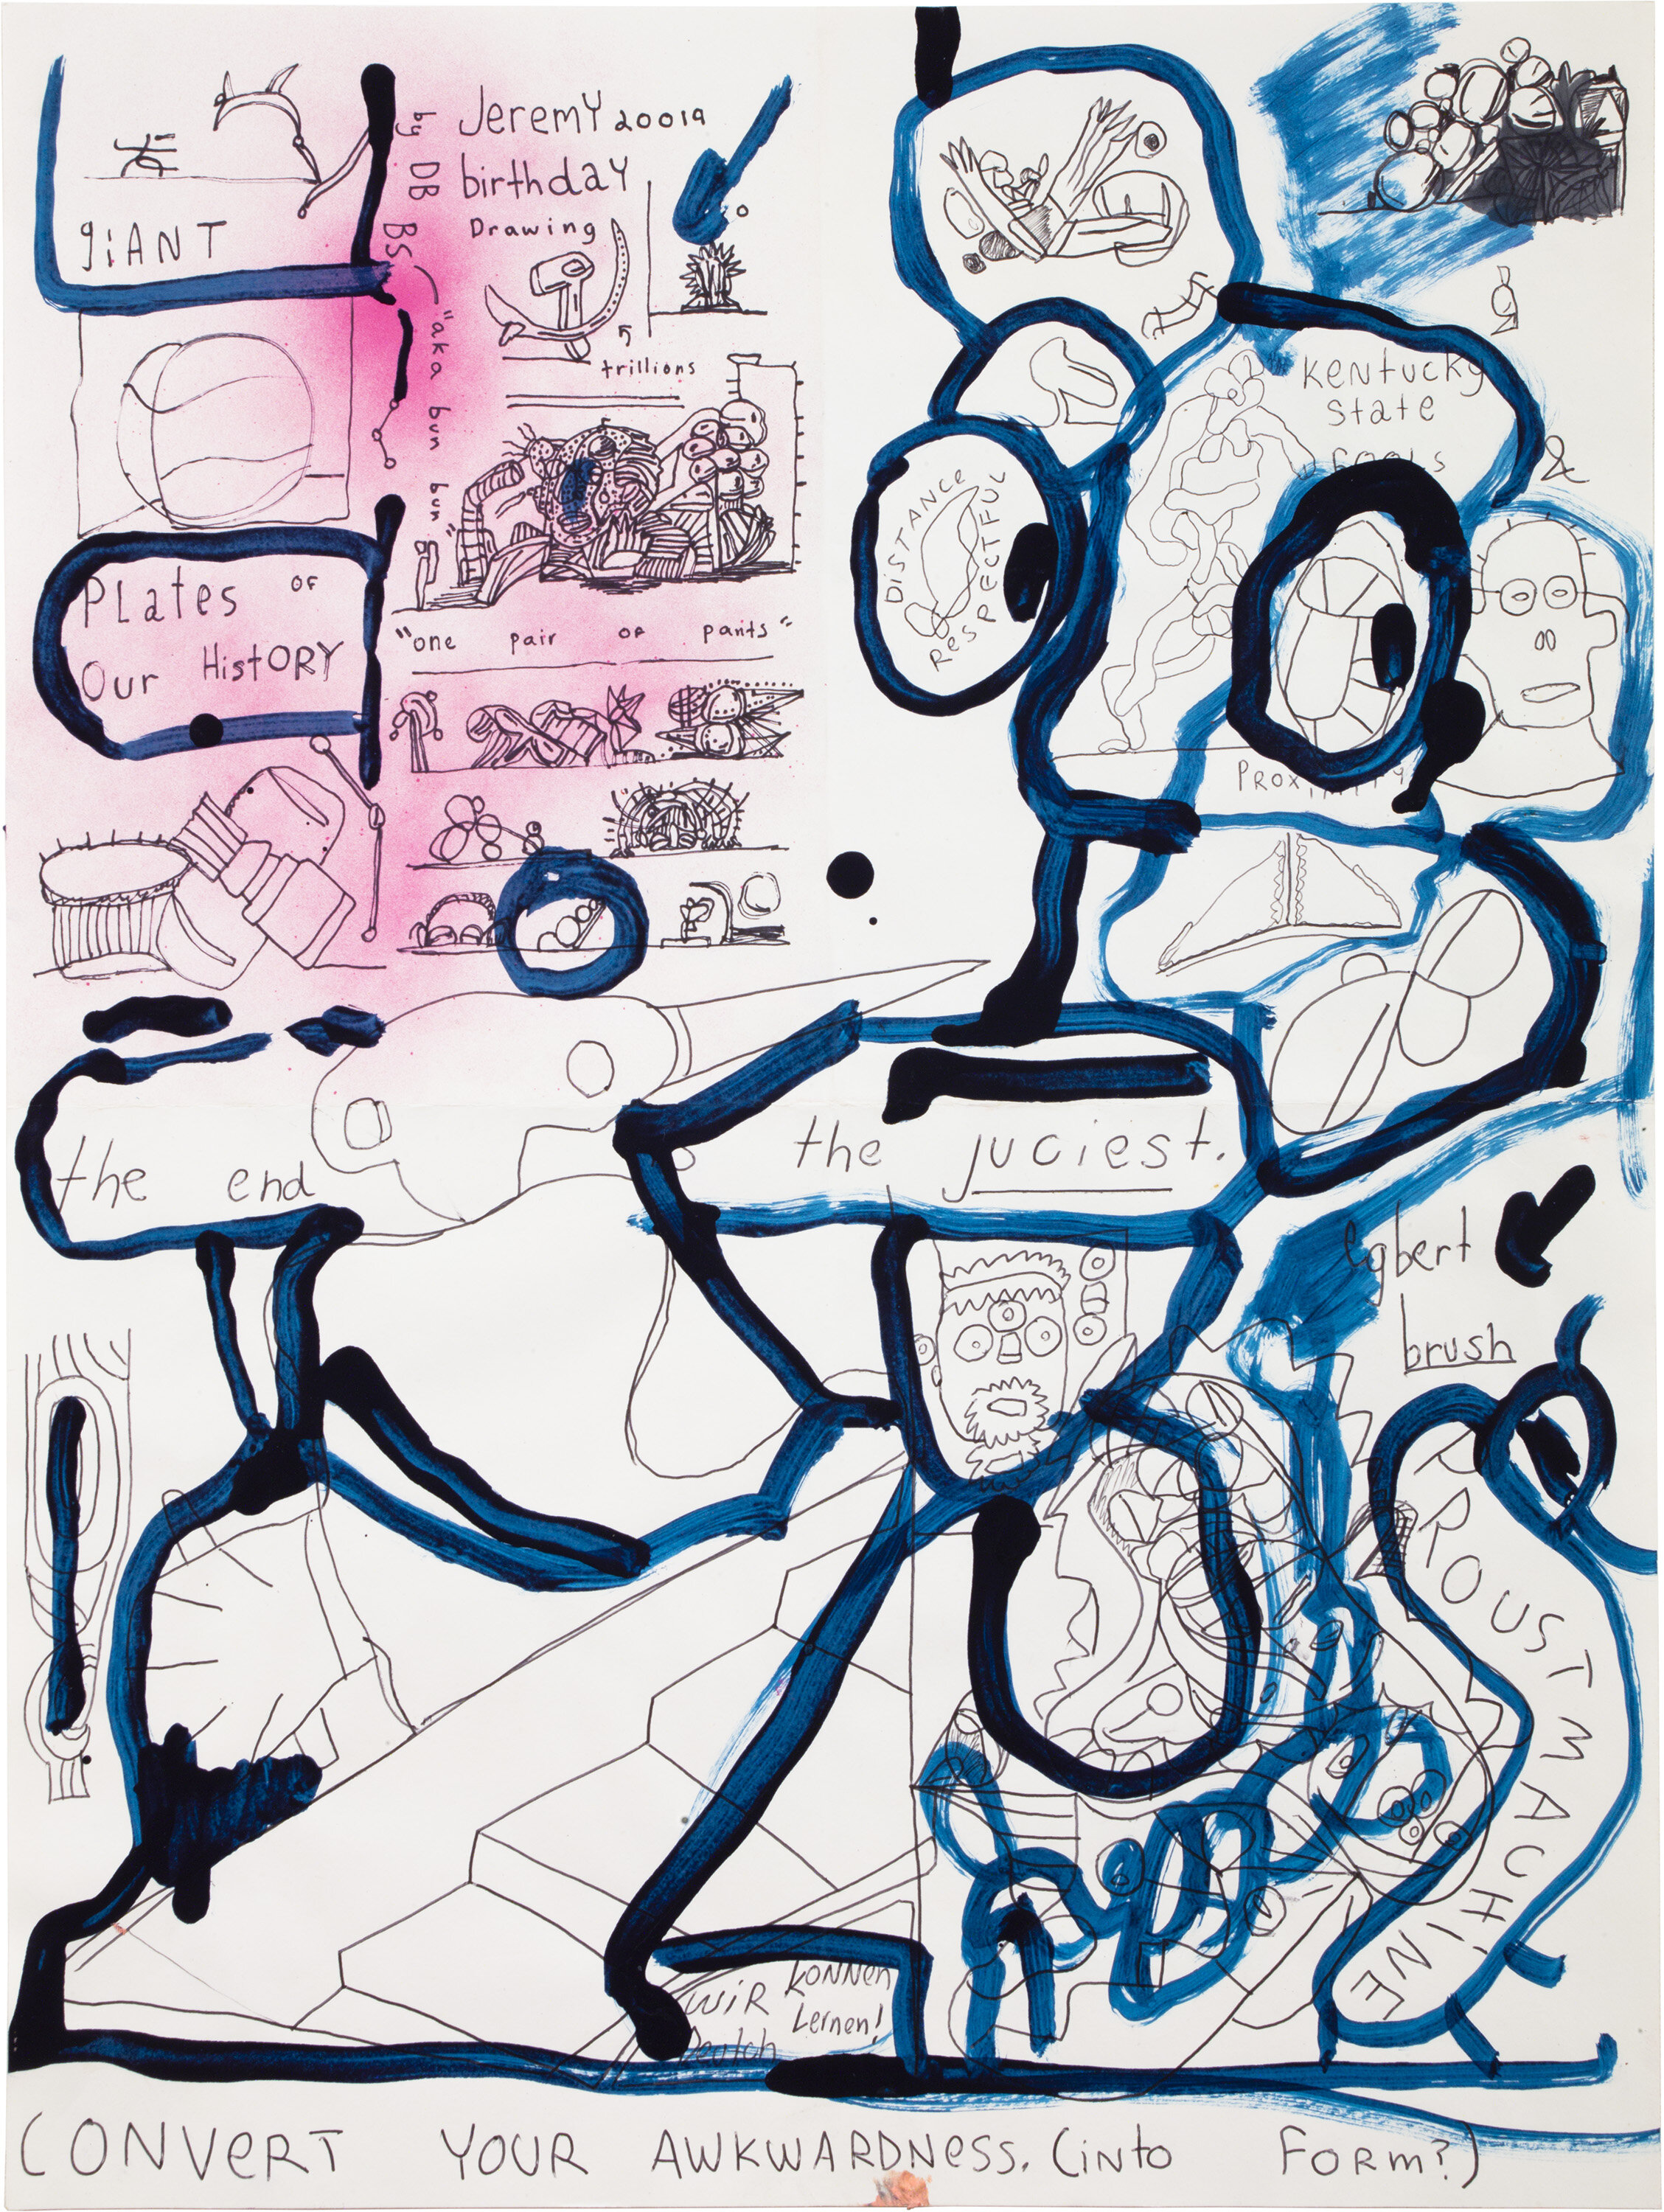  Drew Beattie and Ben Shepard   DBBS-DRW-2019-197   2019 acrylic, spray paint, marker and ballpoint on paper  24 x 18 inches 